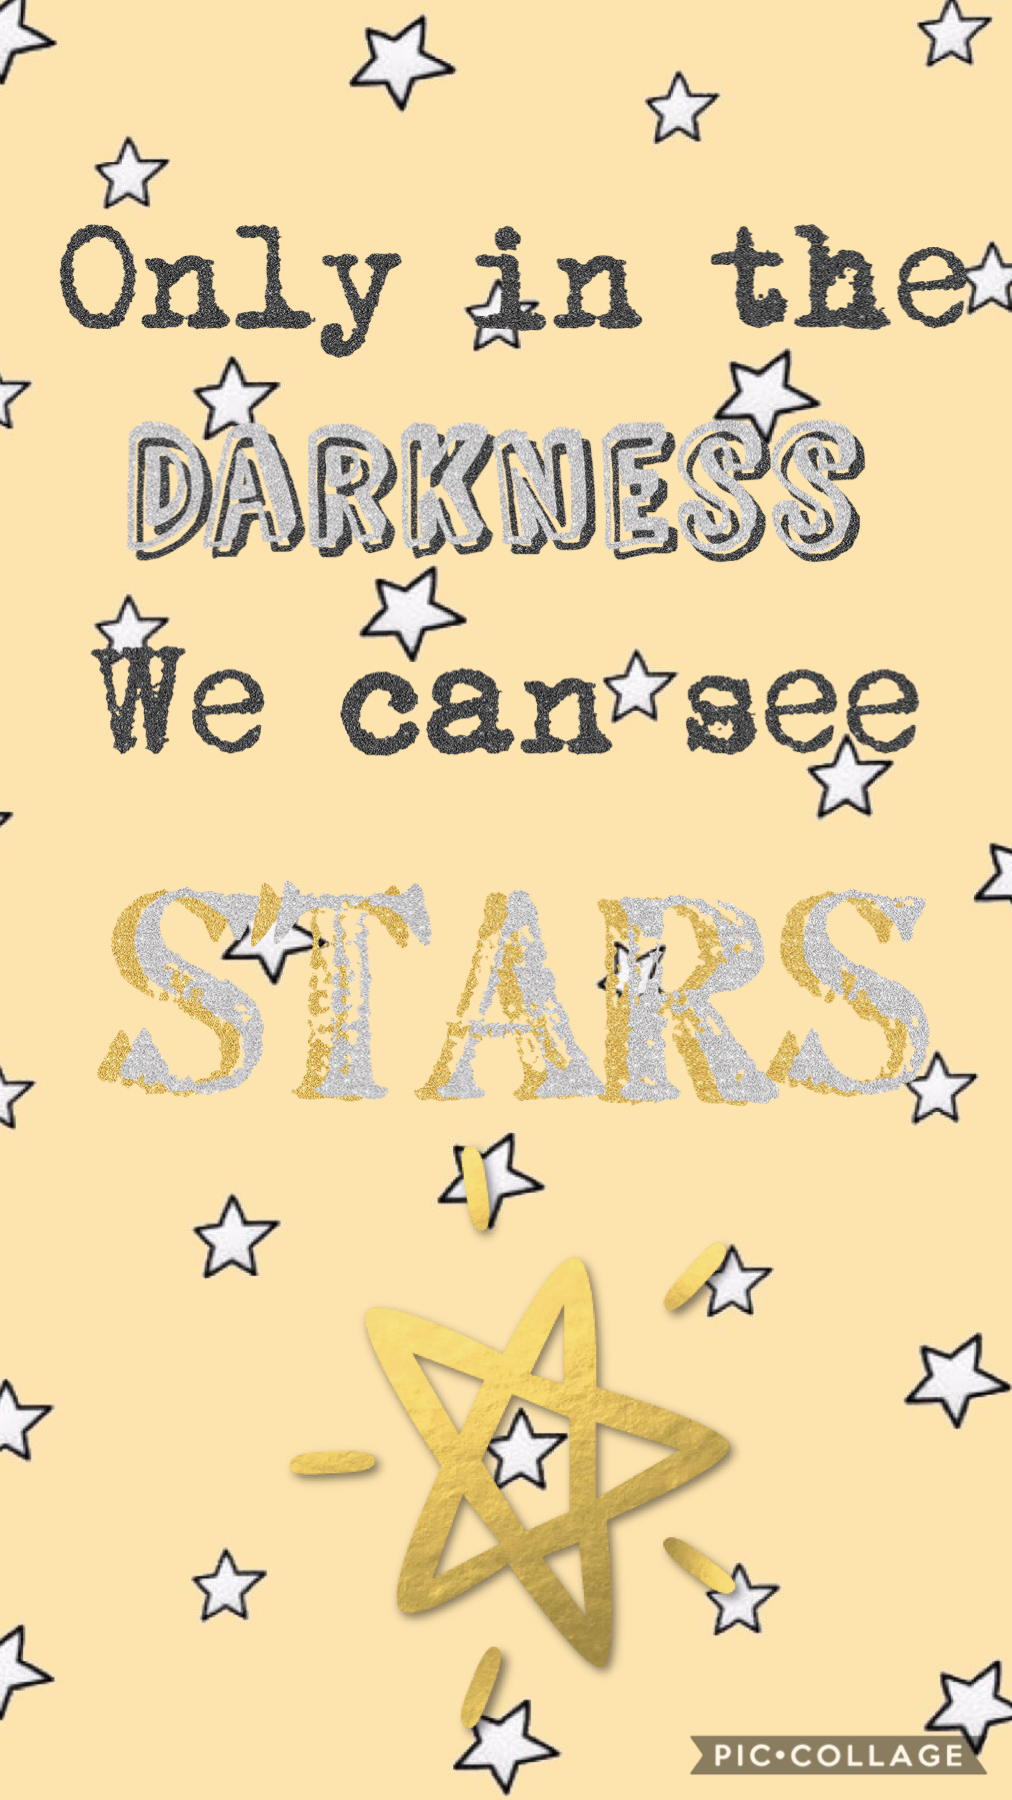 #only in the darkness we can see stars